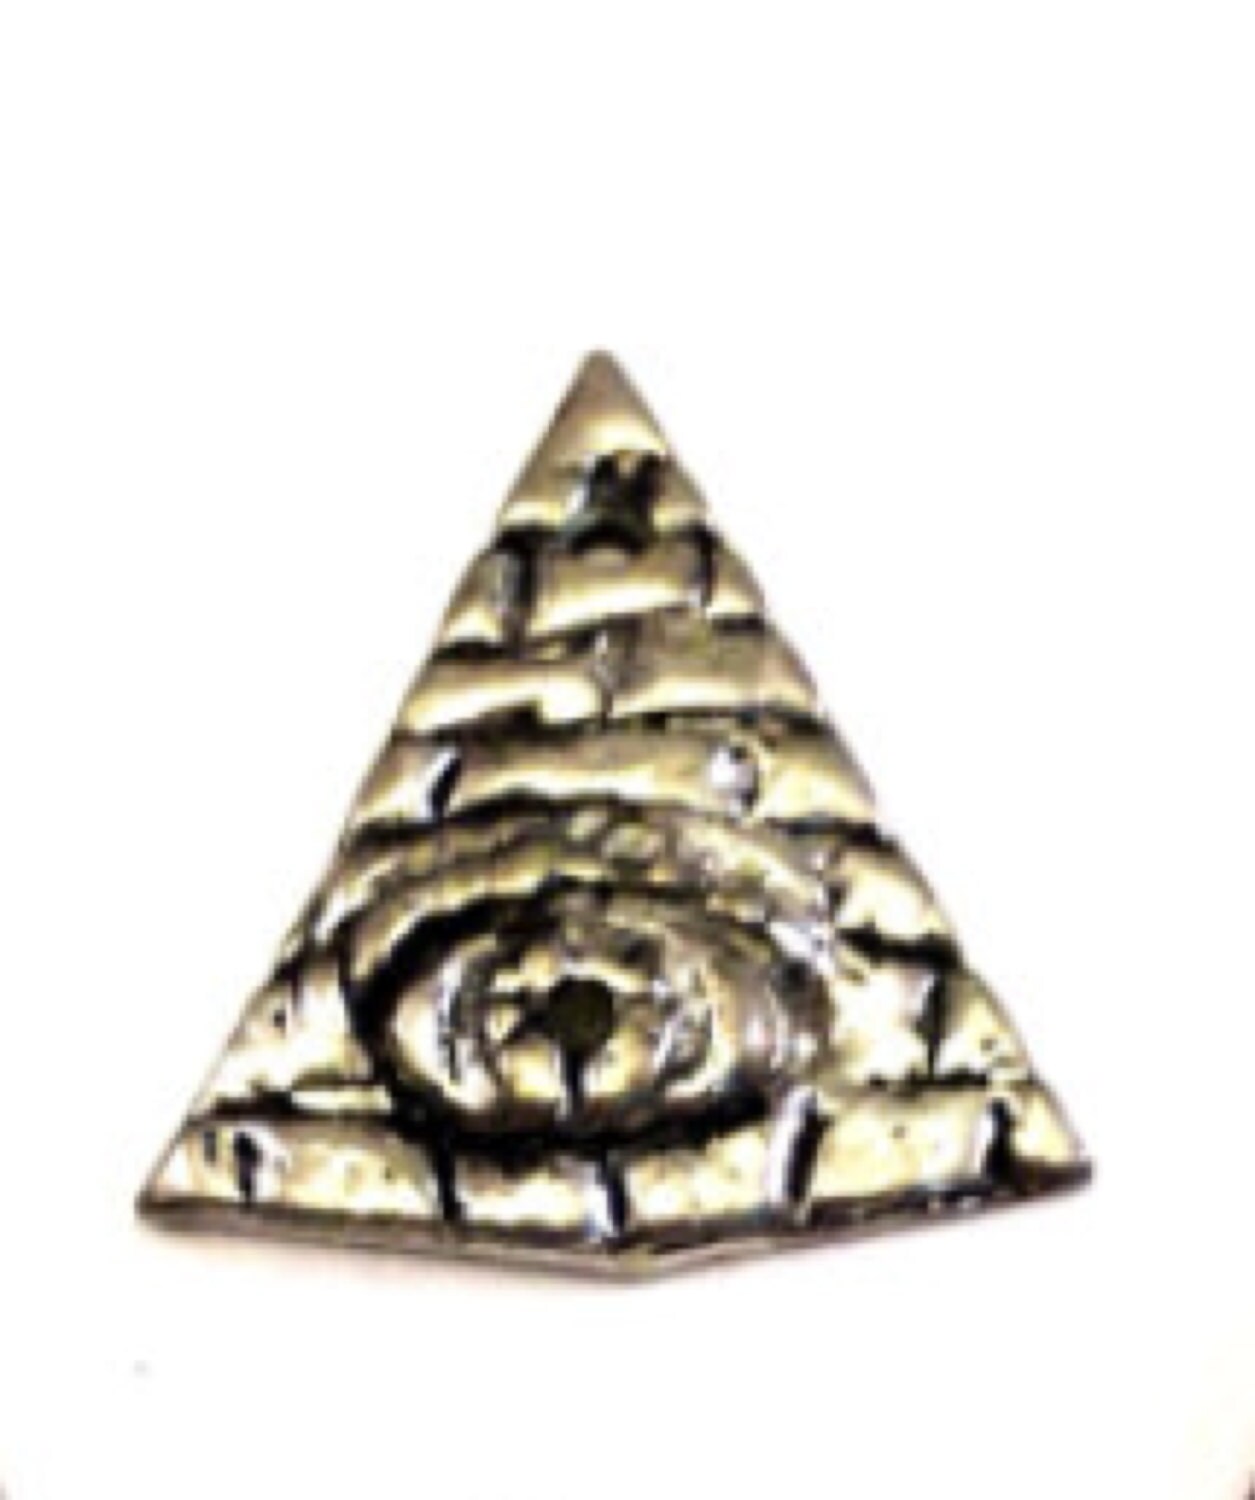 1 Pewter "Pyramid with Evil Eye Symbol" Charm - 17x17mm, Antique Silver Colored